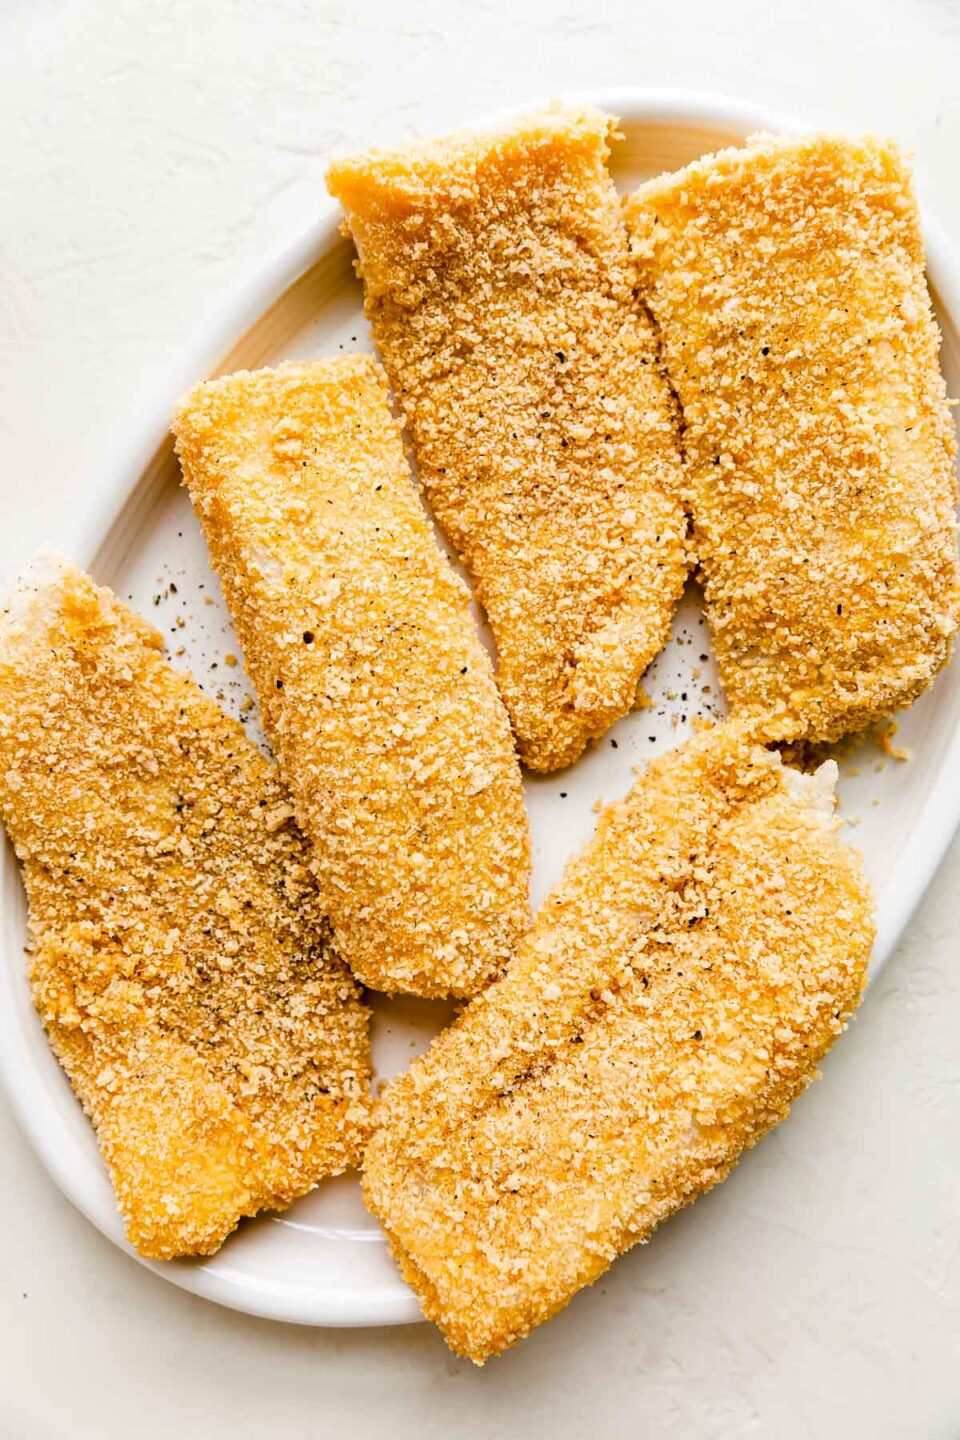 Five panko breaded cod fillets rest atop a white oval shaped serving platter before being shallow fried. The platter sits atop a creamy white textured surface.